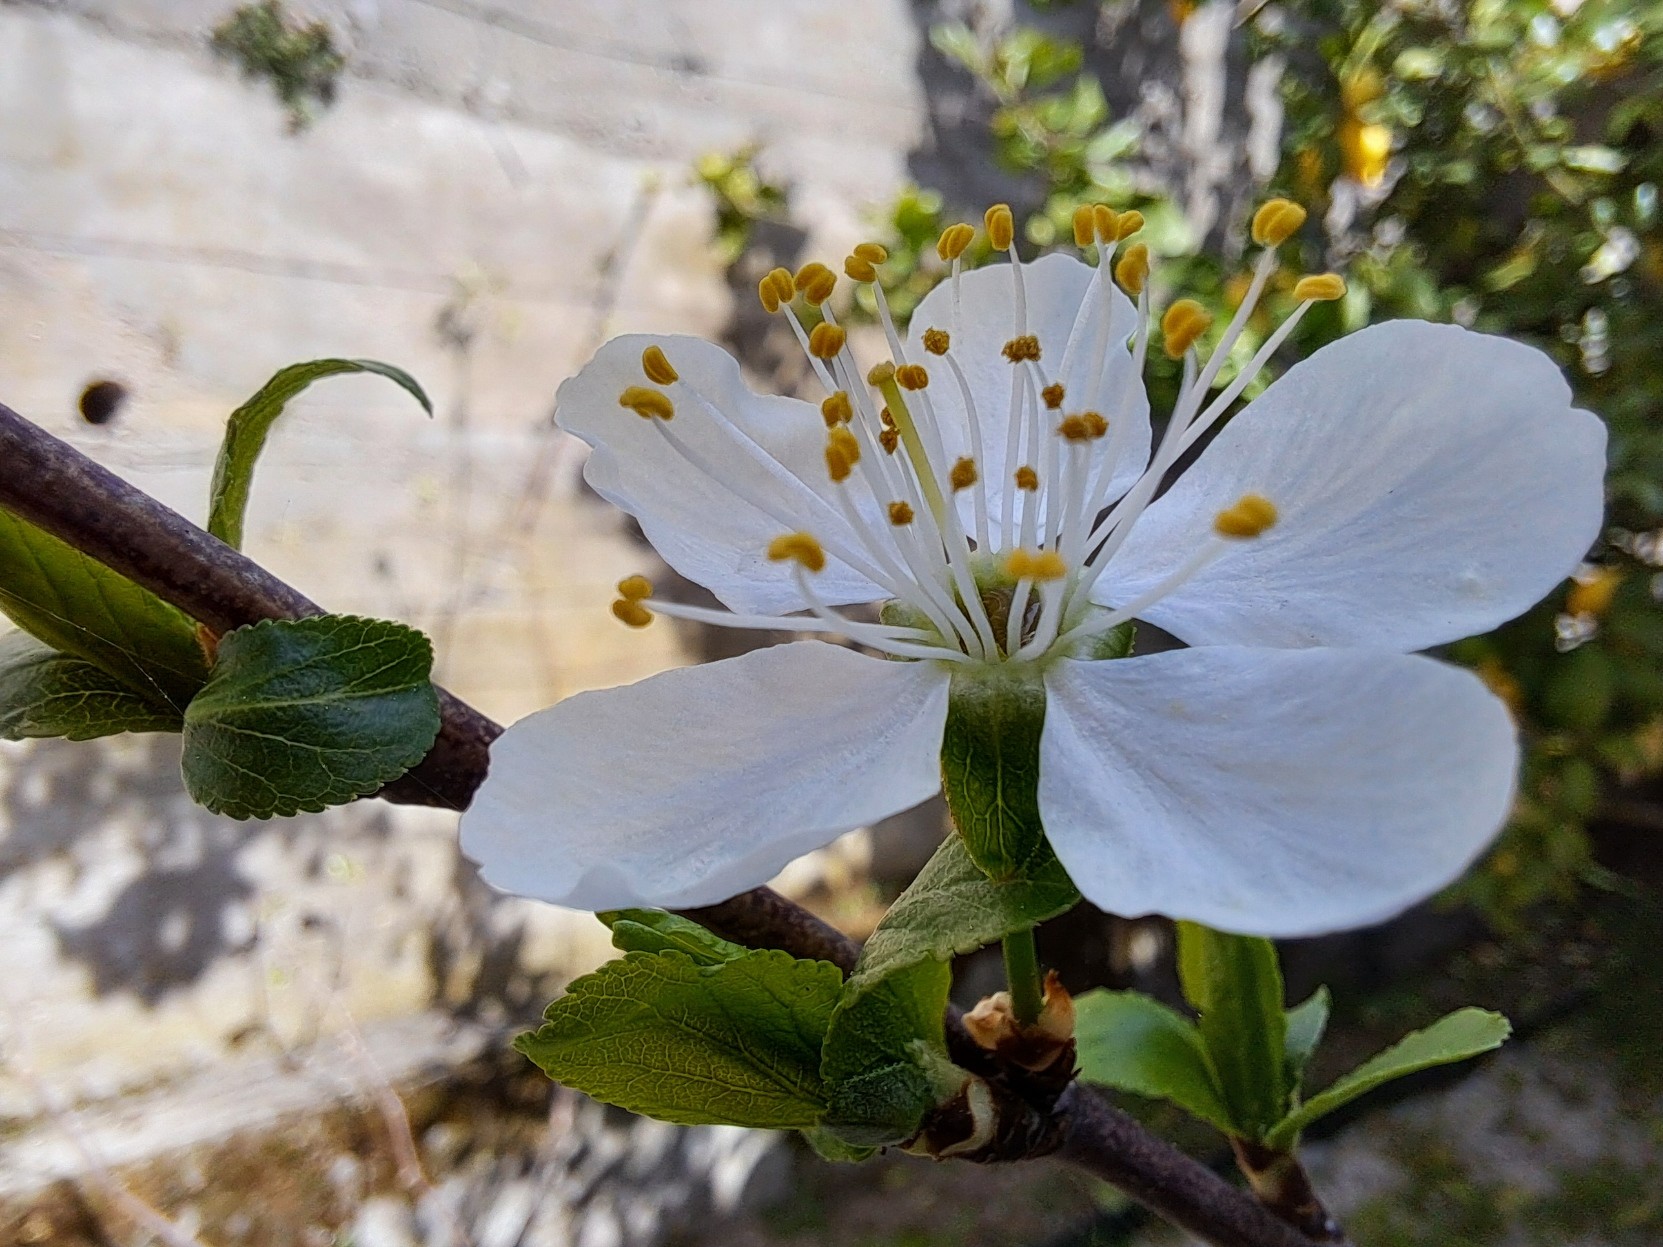 A detail of a plum tree flower, white with yellow stems. Behind a wall and part of a lemon tree.